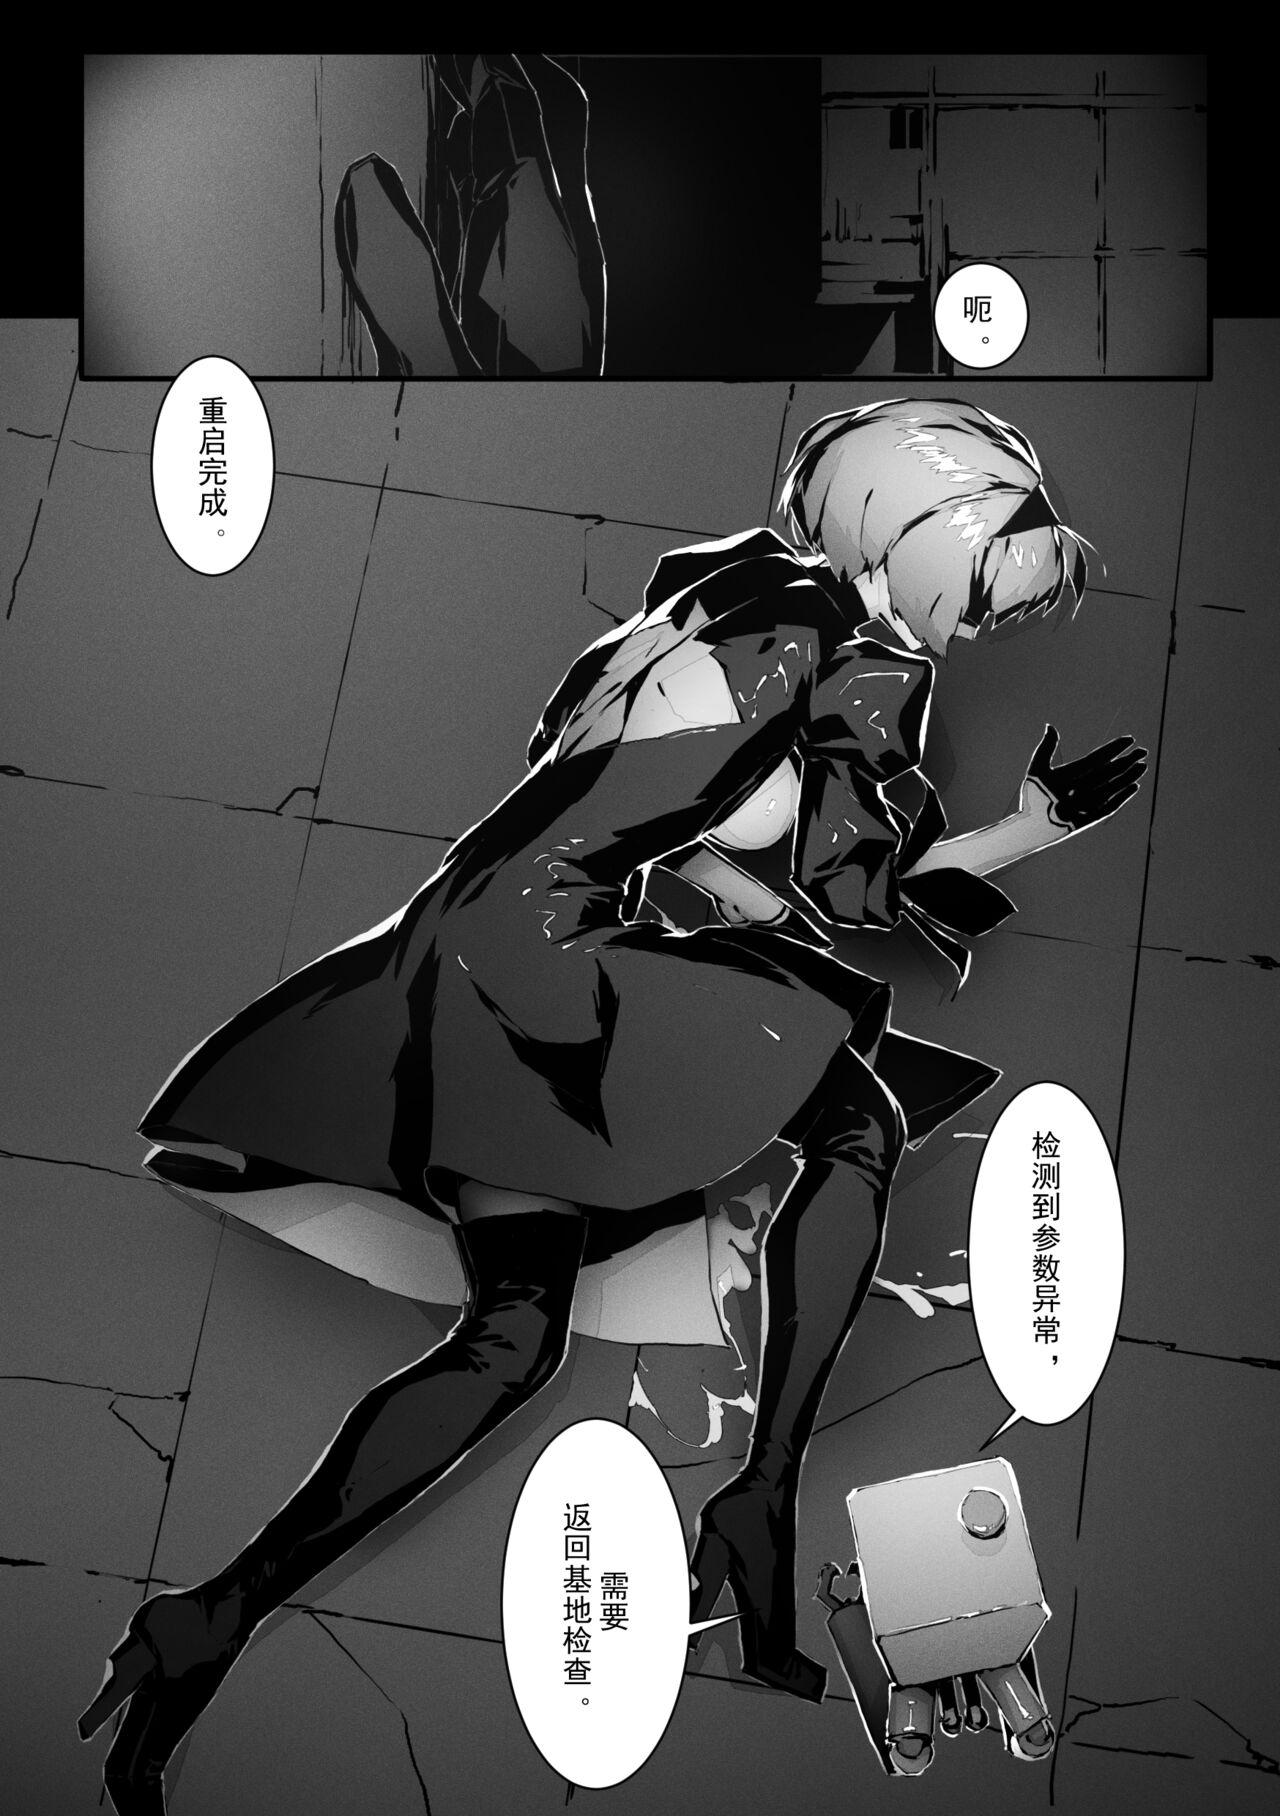 2B In Trouble Part 1-6 23